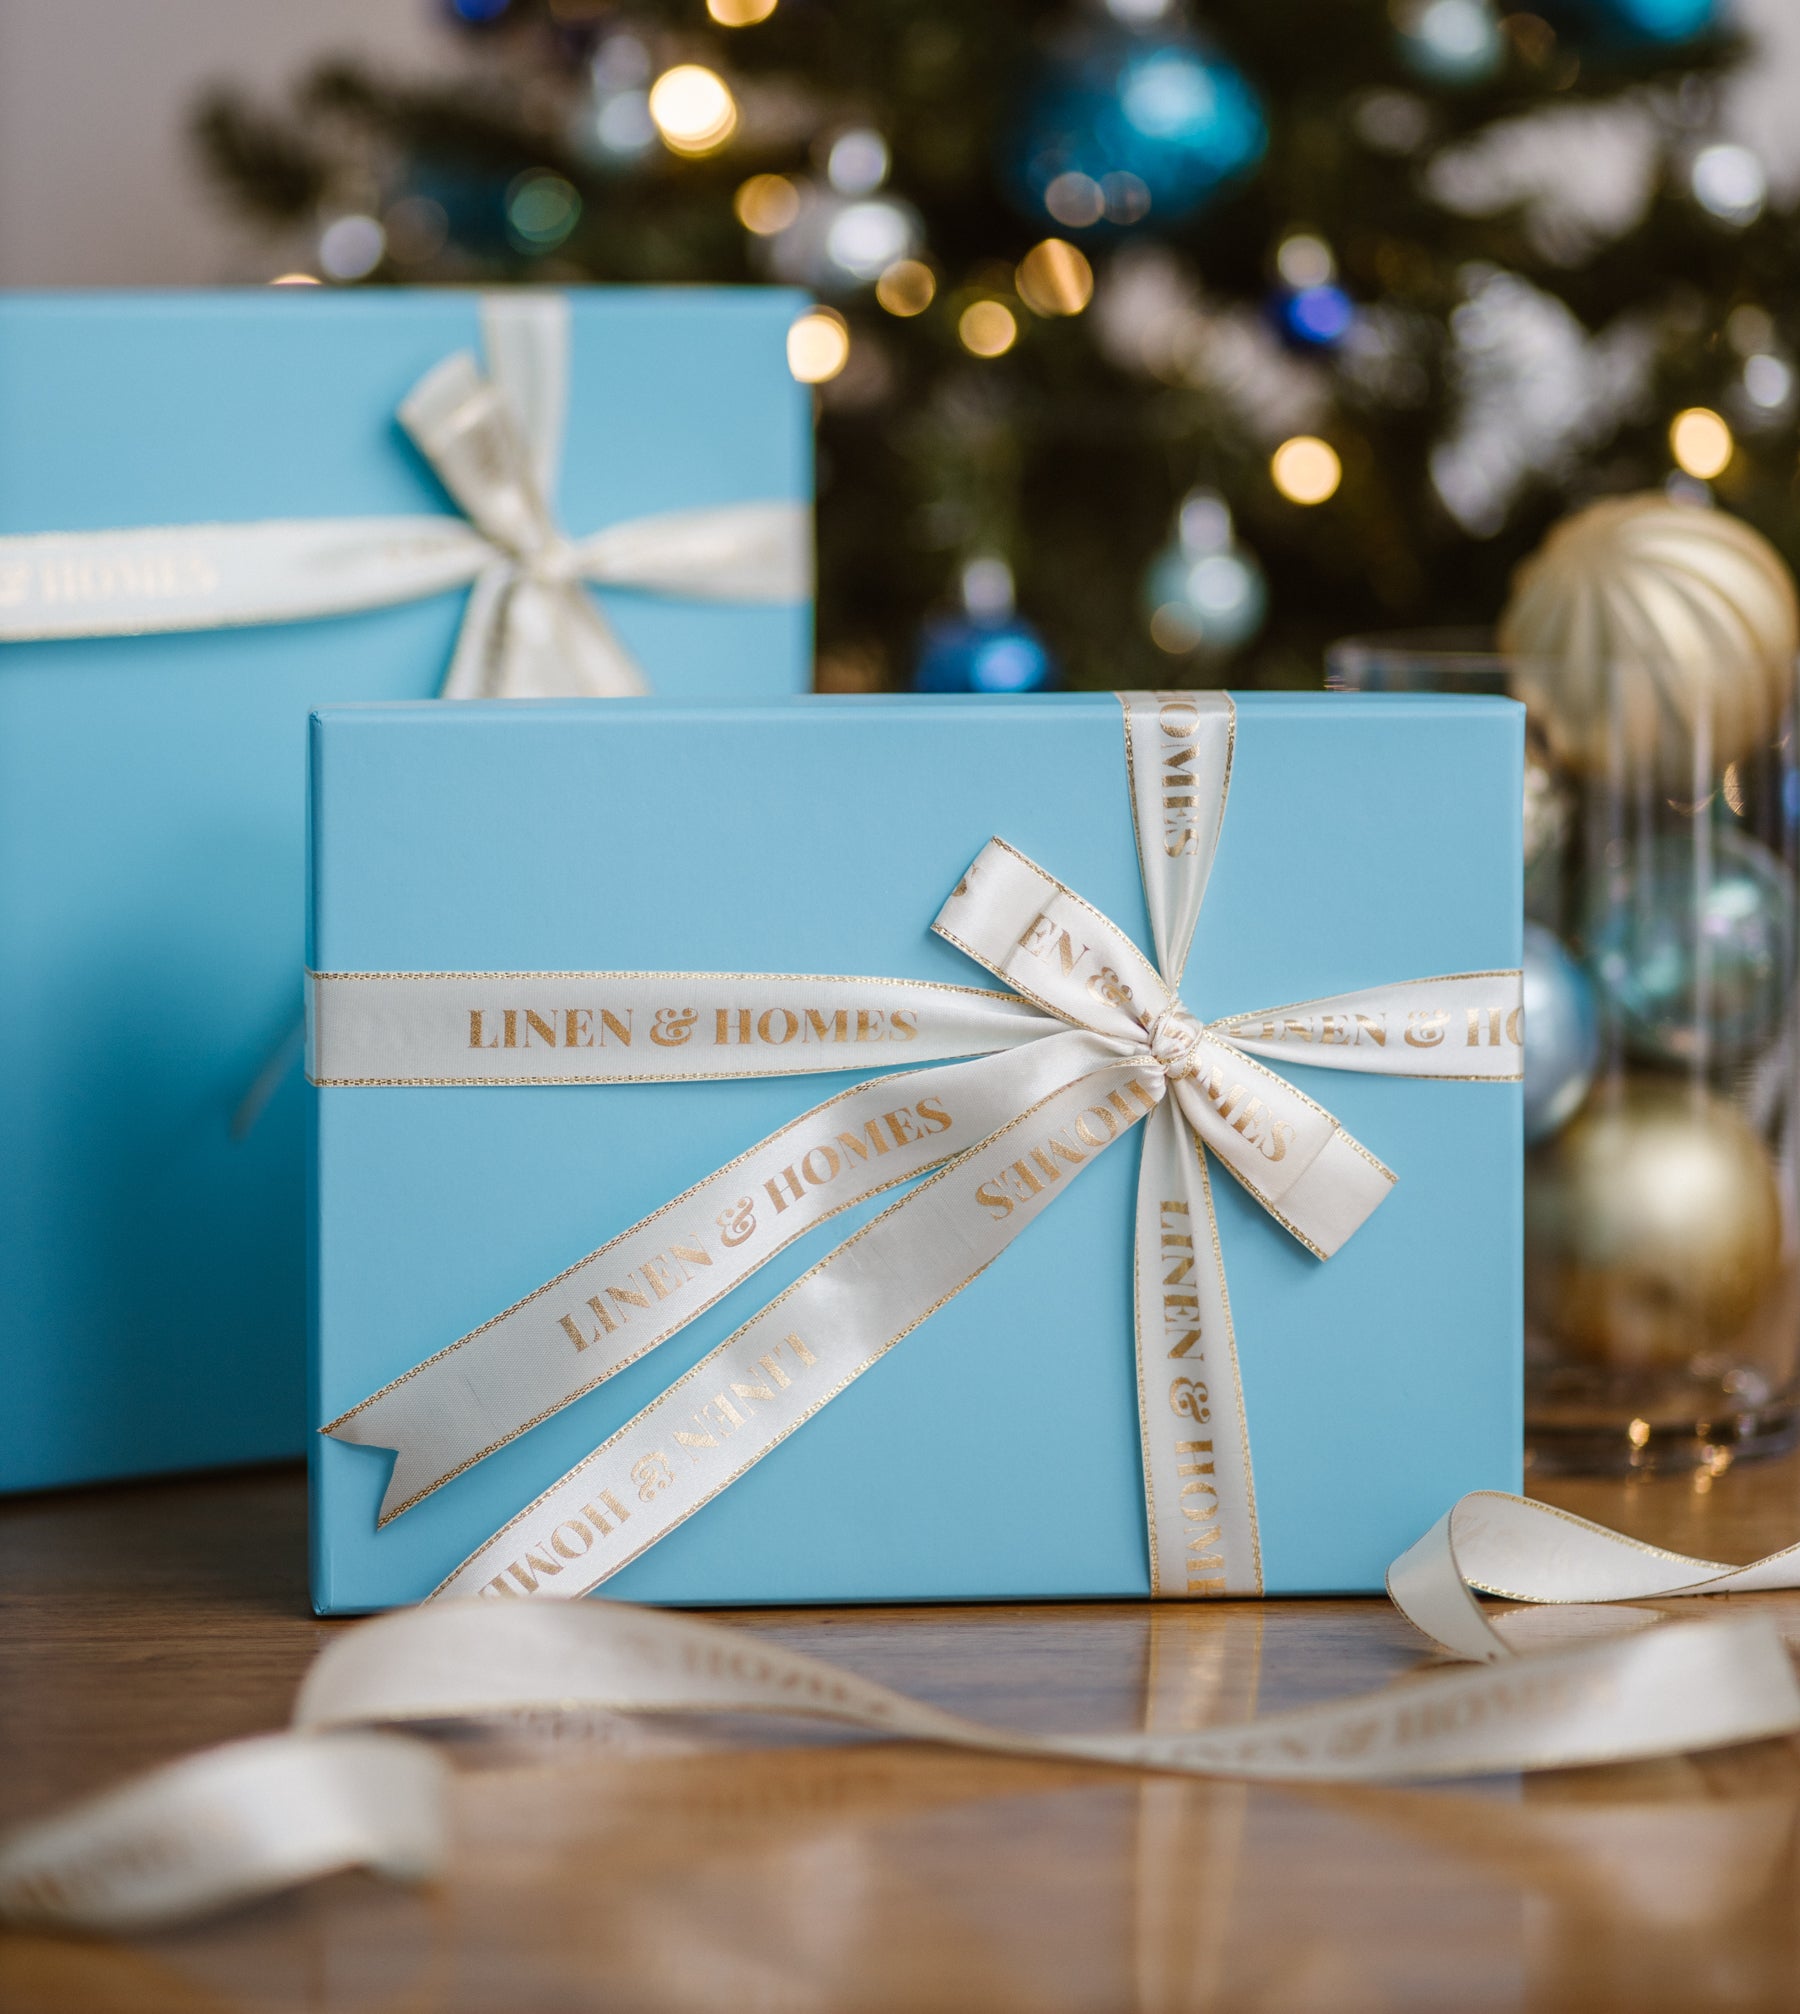 Linen & Homes Holiday Gift Guide 2021